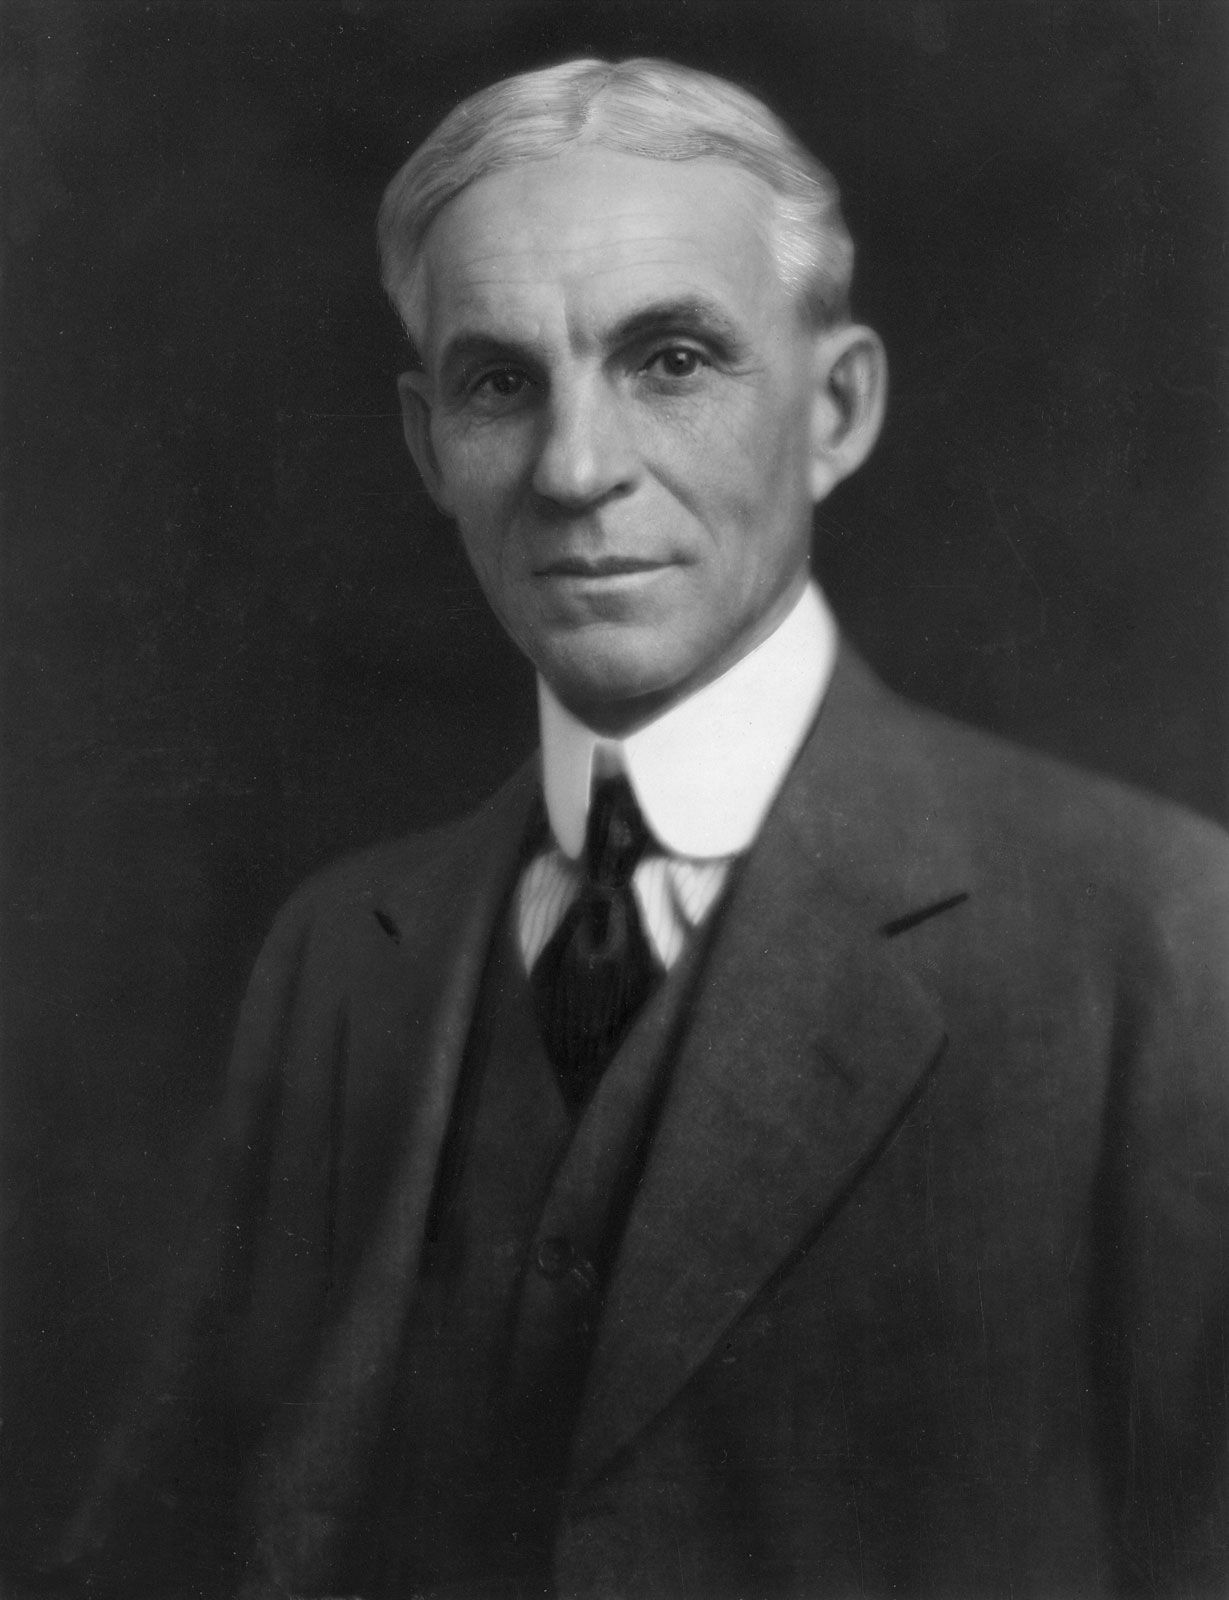 Henry Ford Biography Education Inventions Facts